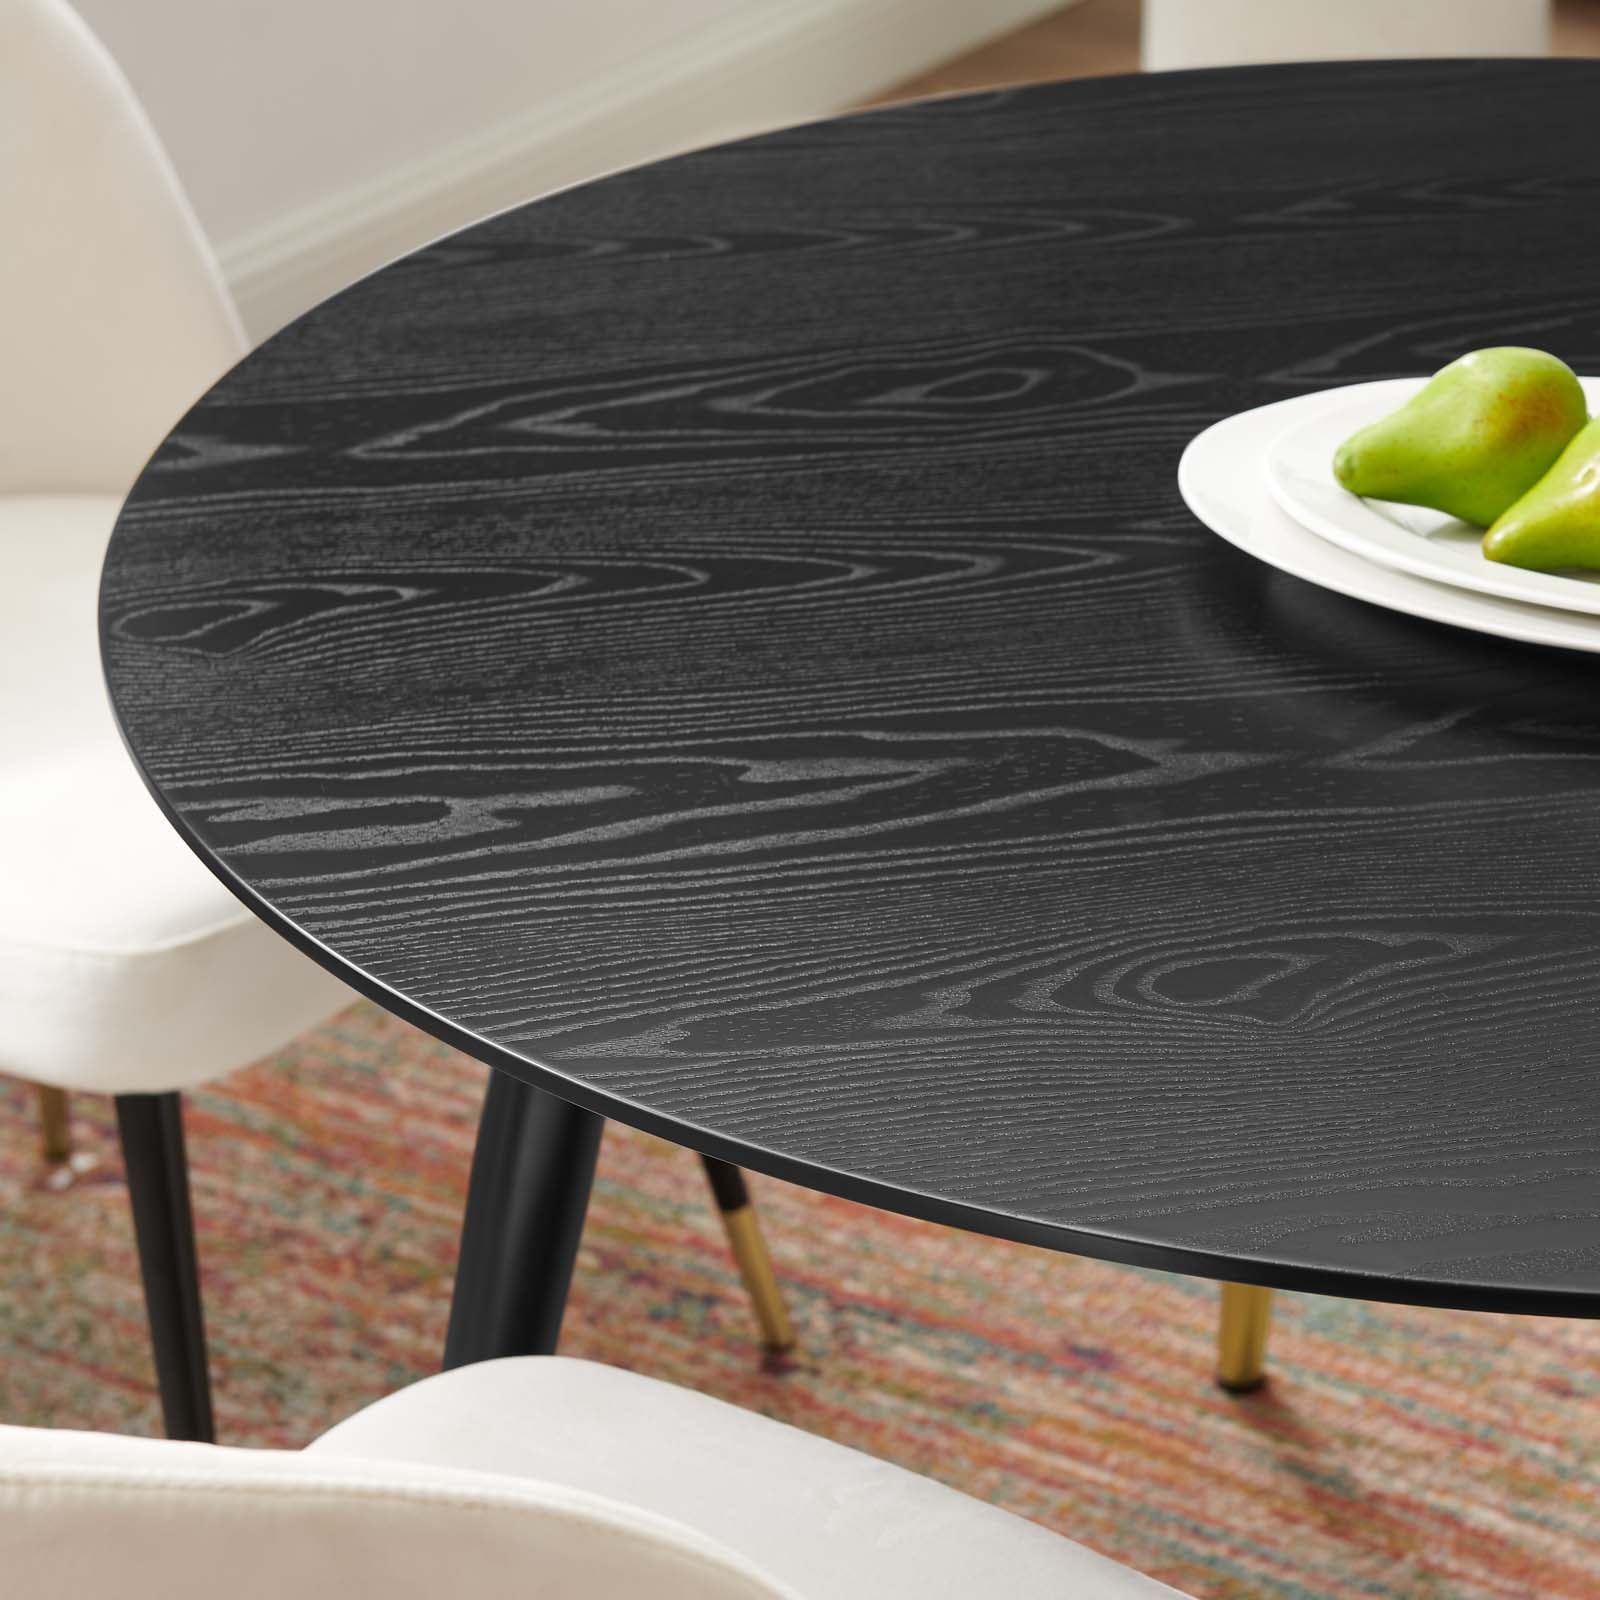 Modway Dining Tables - Vigor Round Dining Table Black